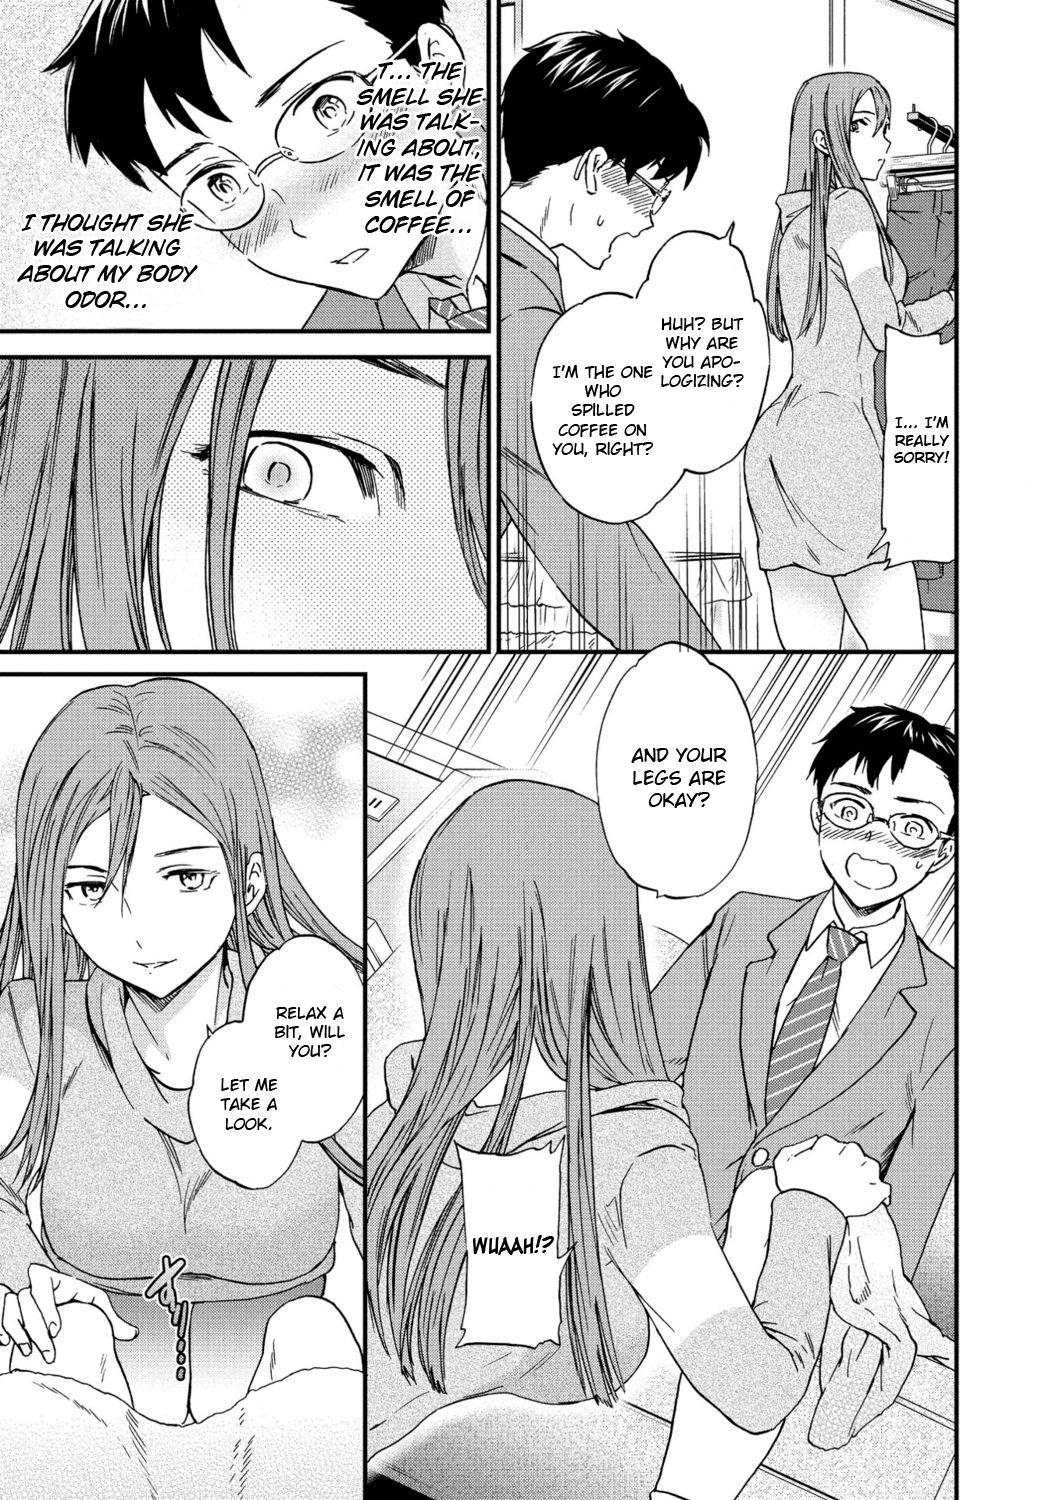 Funny Yuutousei | Model student Jerking Off - Page 11